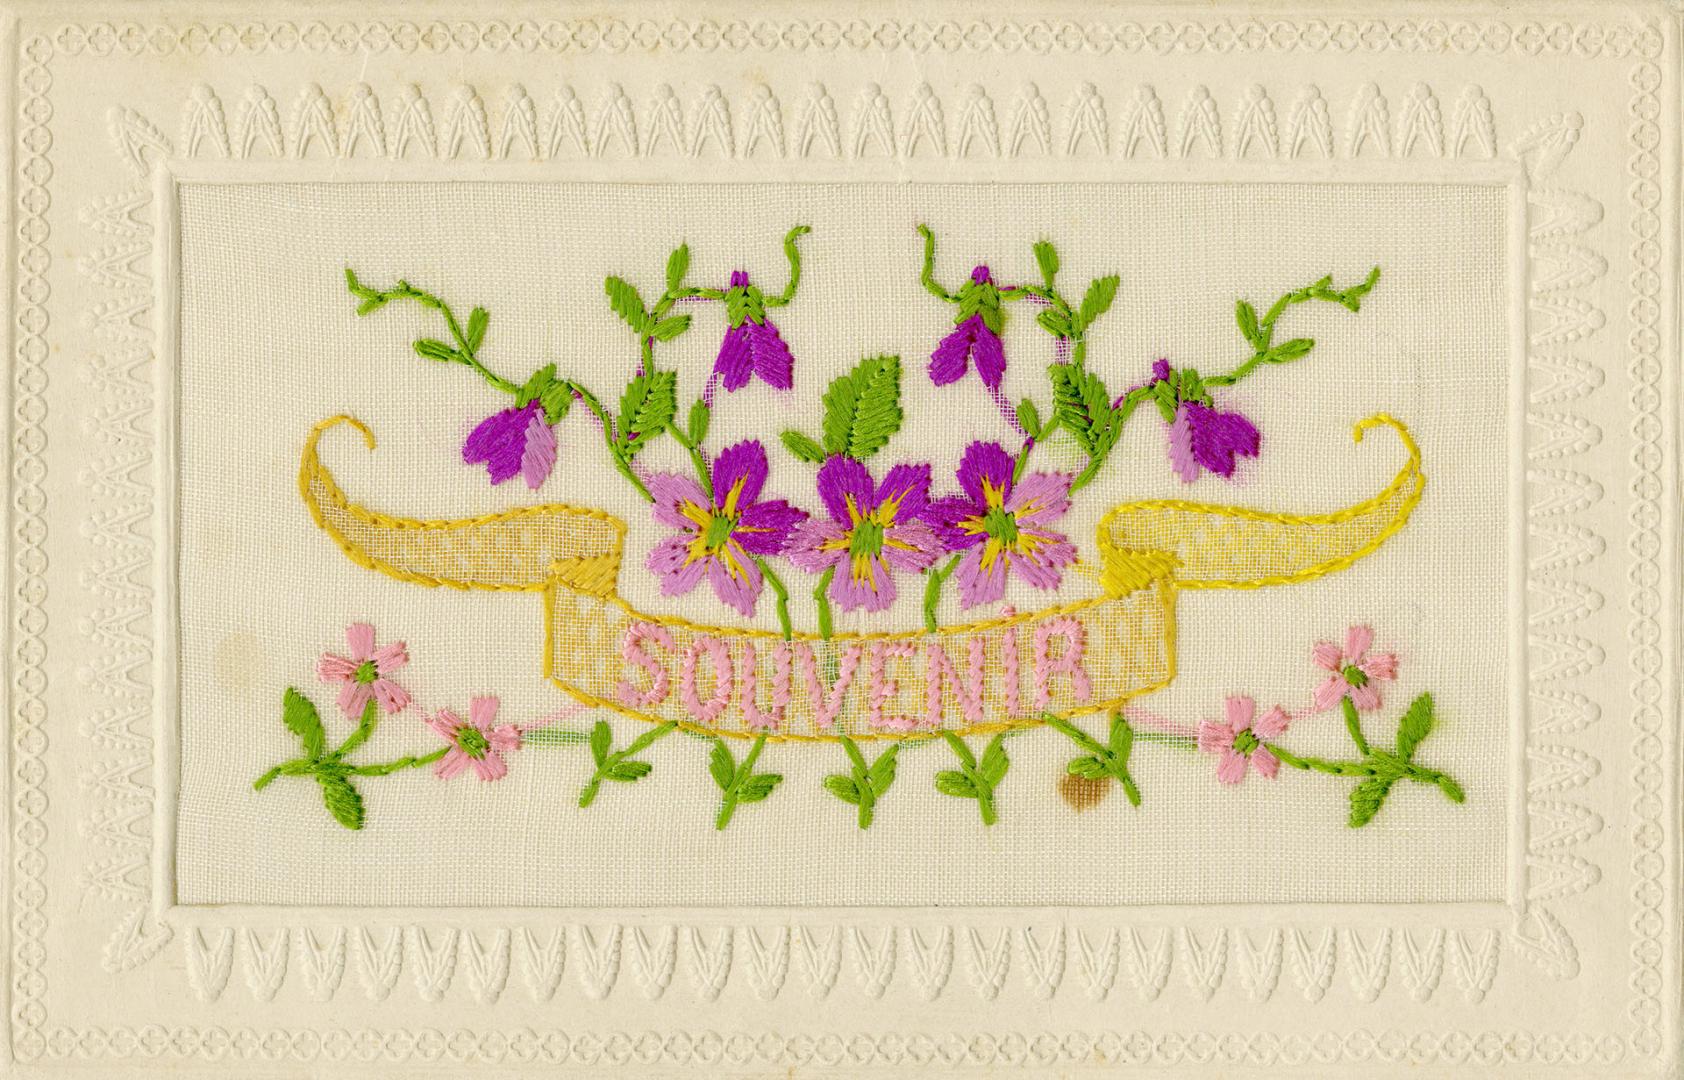 Silk embroidery of purple flowers behind a banner which reads "souvenir."